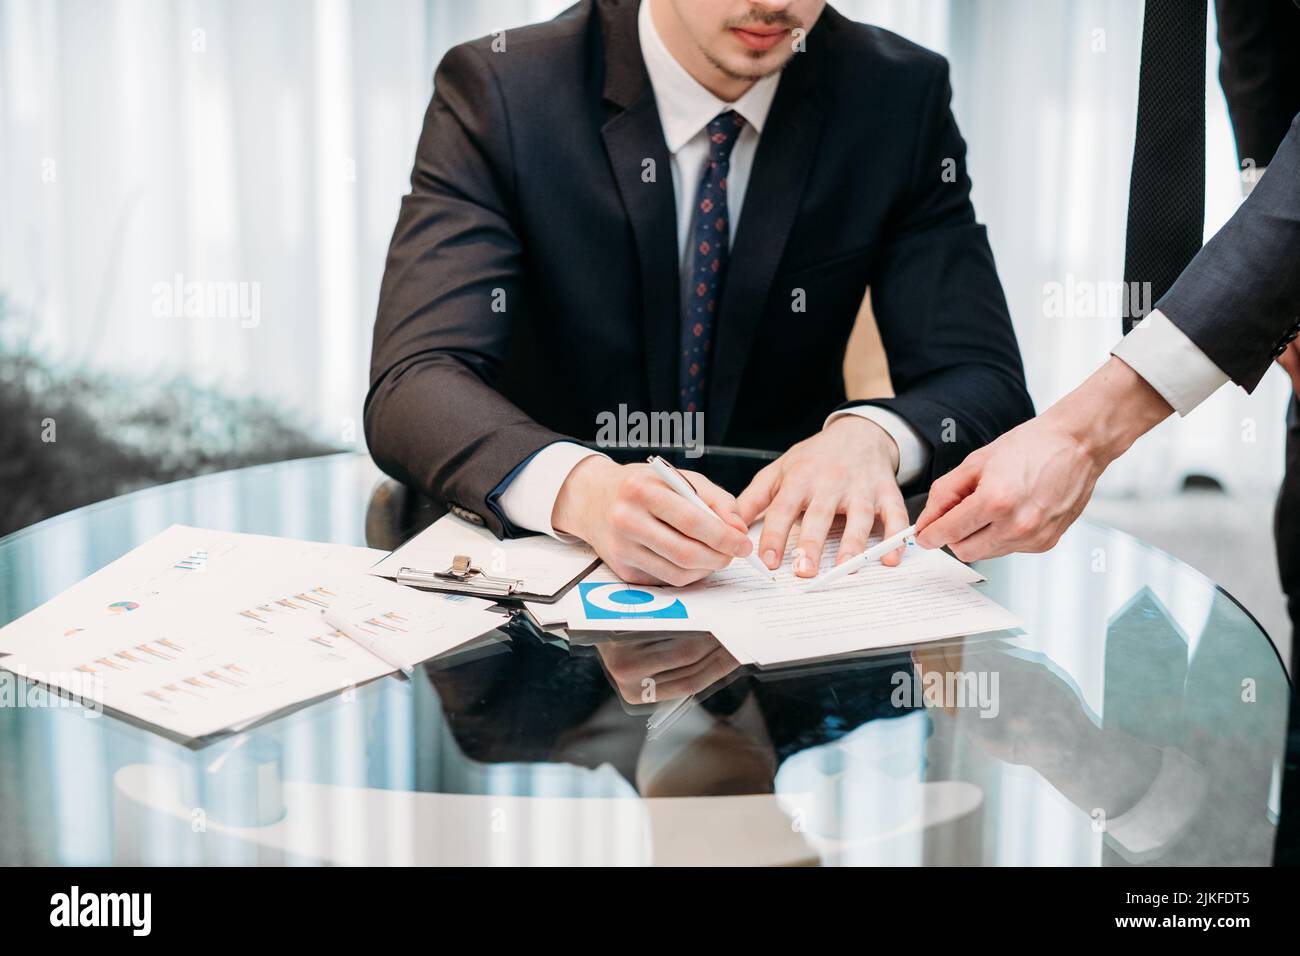 company ceo sign document assistant casual workday Stock Photo